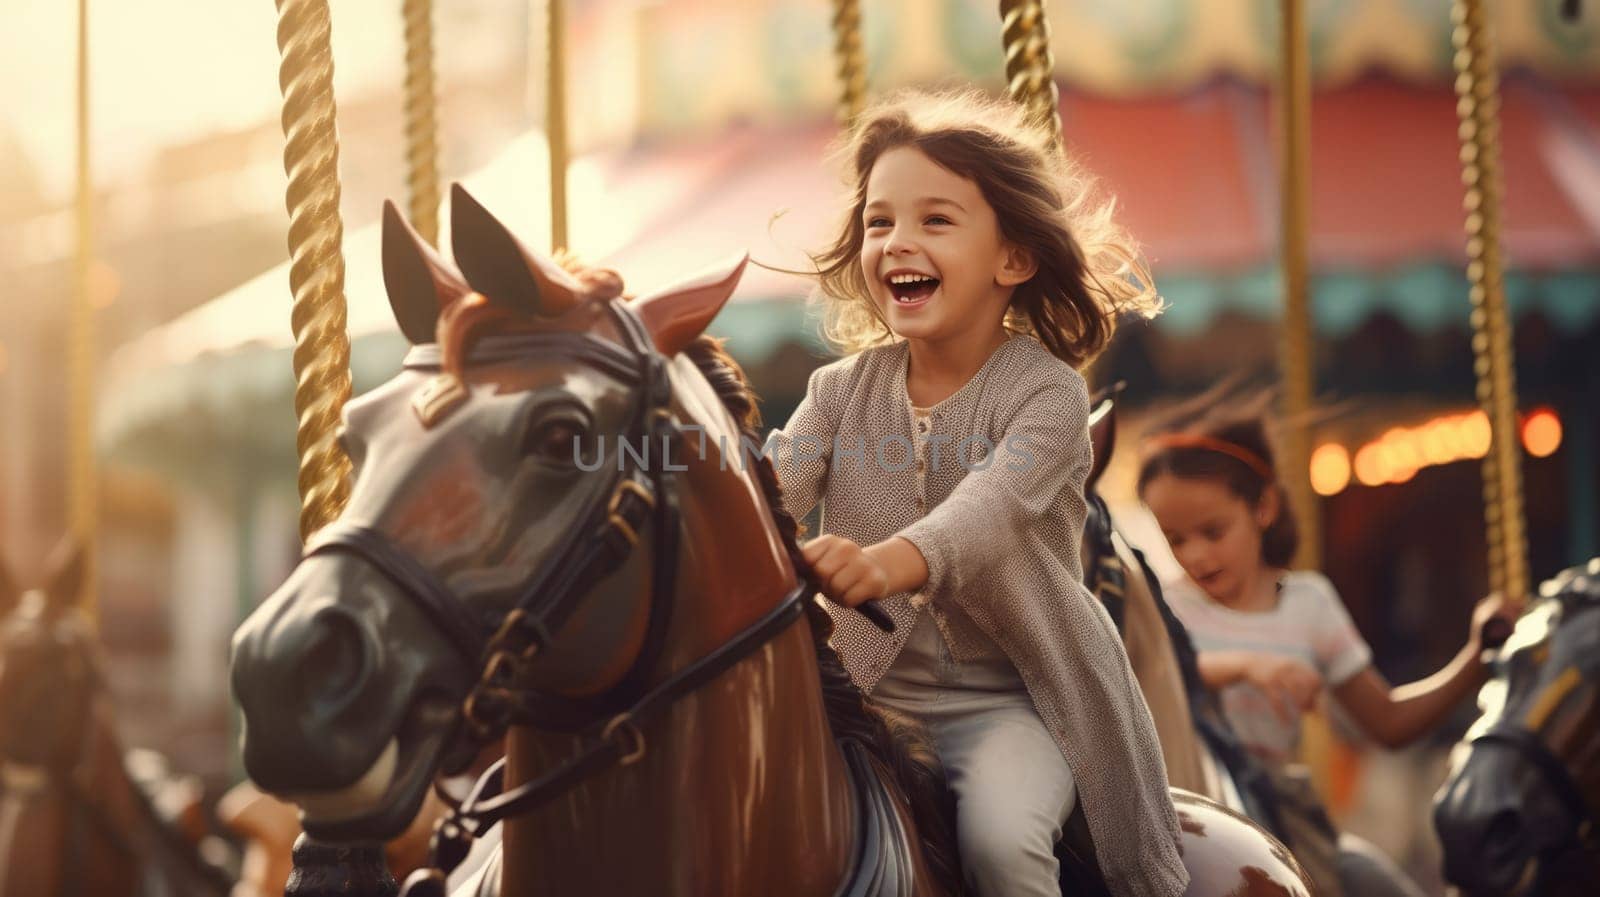 A happy little girl rides a carousel horse at a carnival or fun fair. The carousel is lit up with colorful lights, and the girl is smiling and laughing. Isolated on a blurred background.